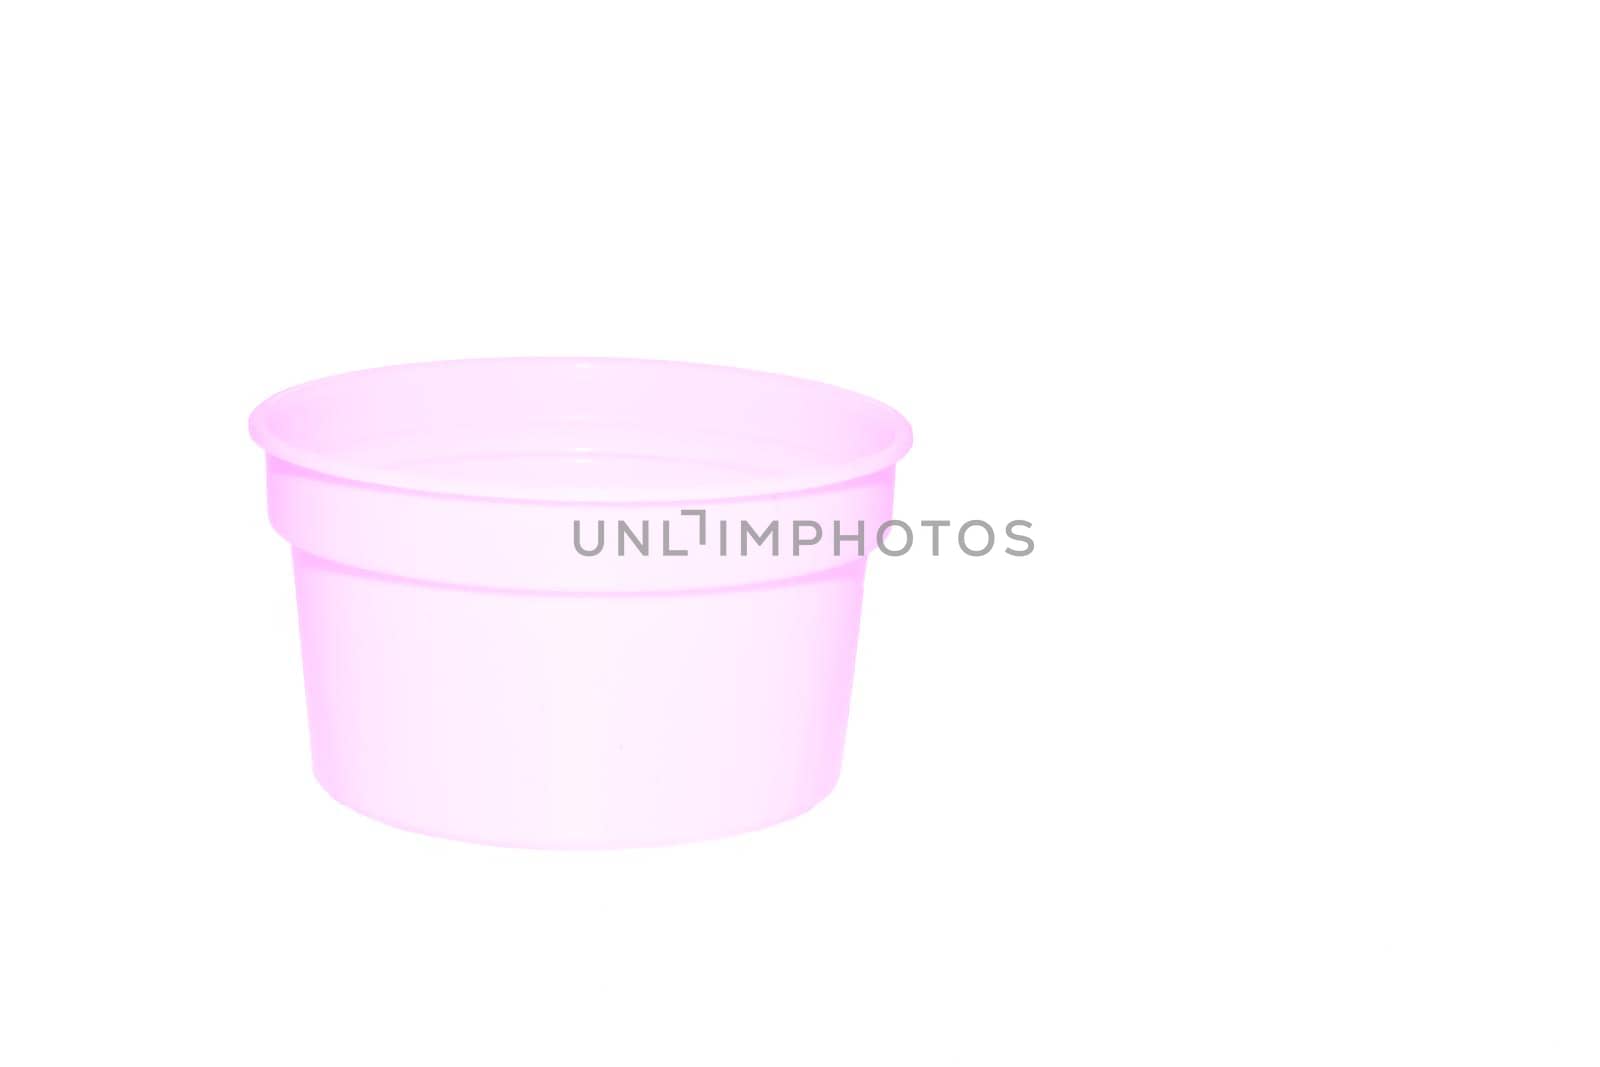 a wide mouthed cylindrical container made of glass or pottery and typically having a lid, used especially for storing product. Delicate pale pink purple plastic jar capacity of isolated on white